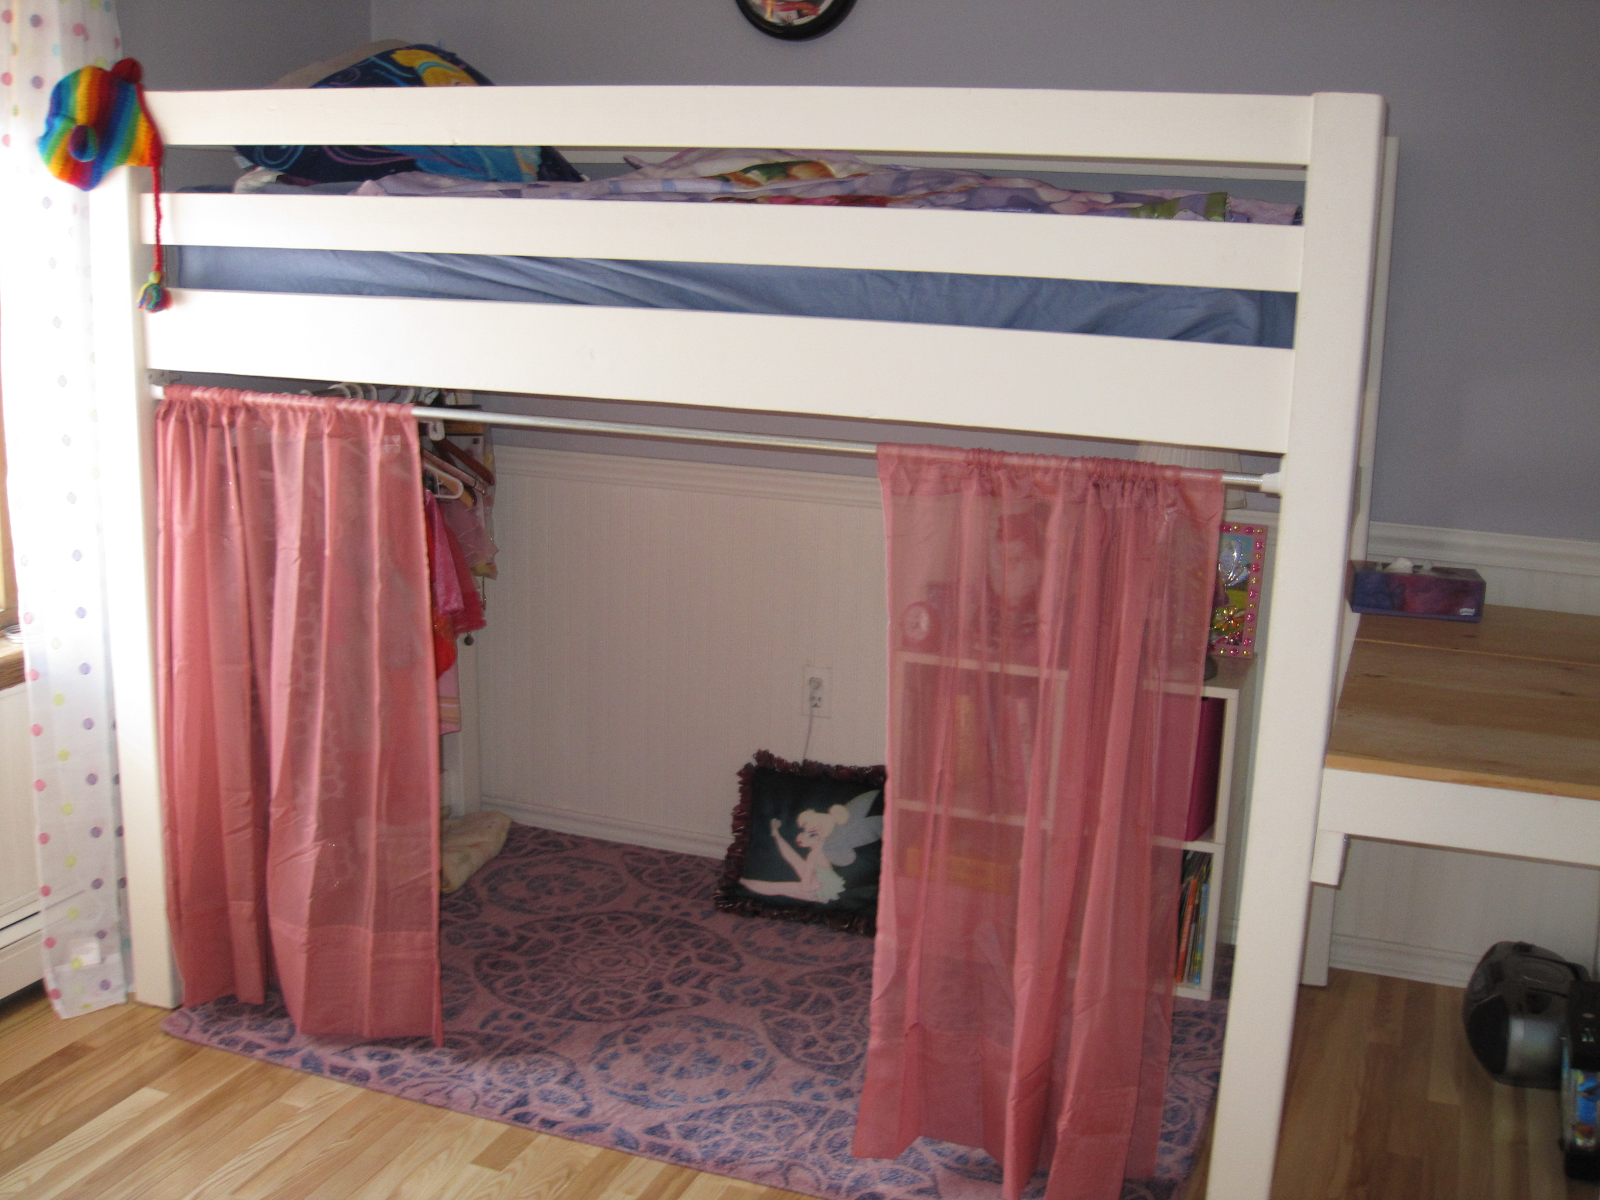 Use curtains to hide space below loft bed